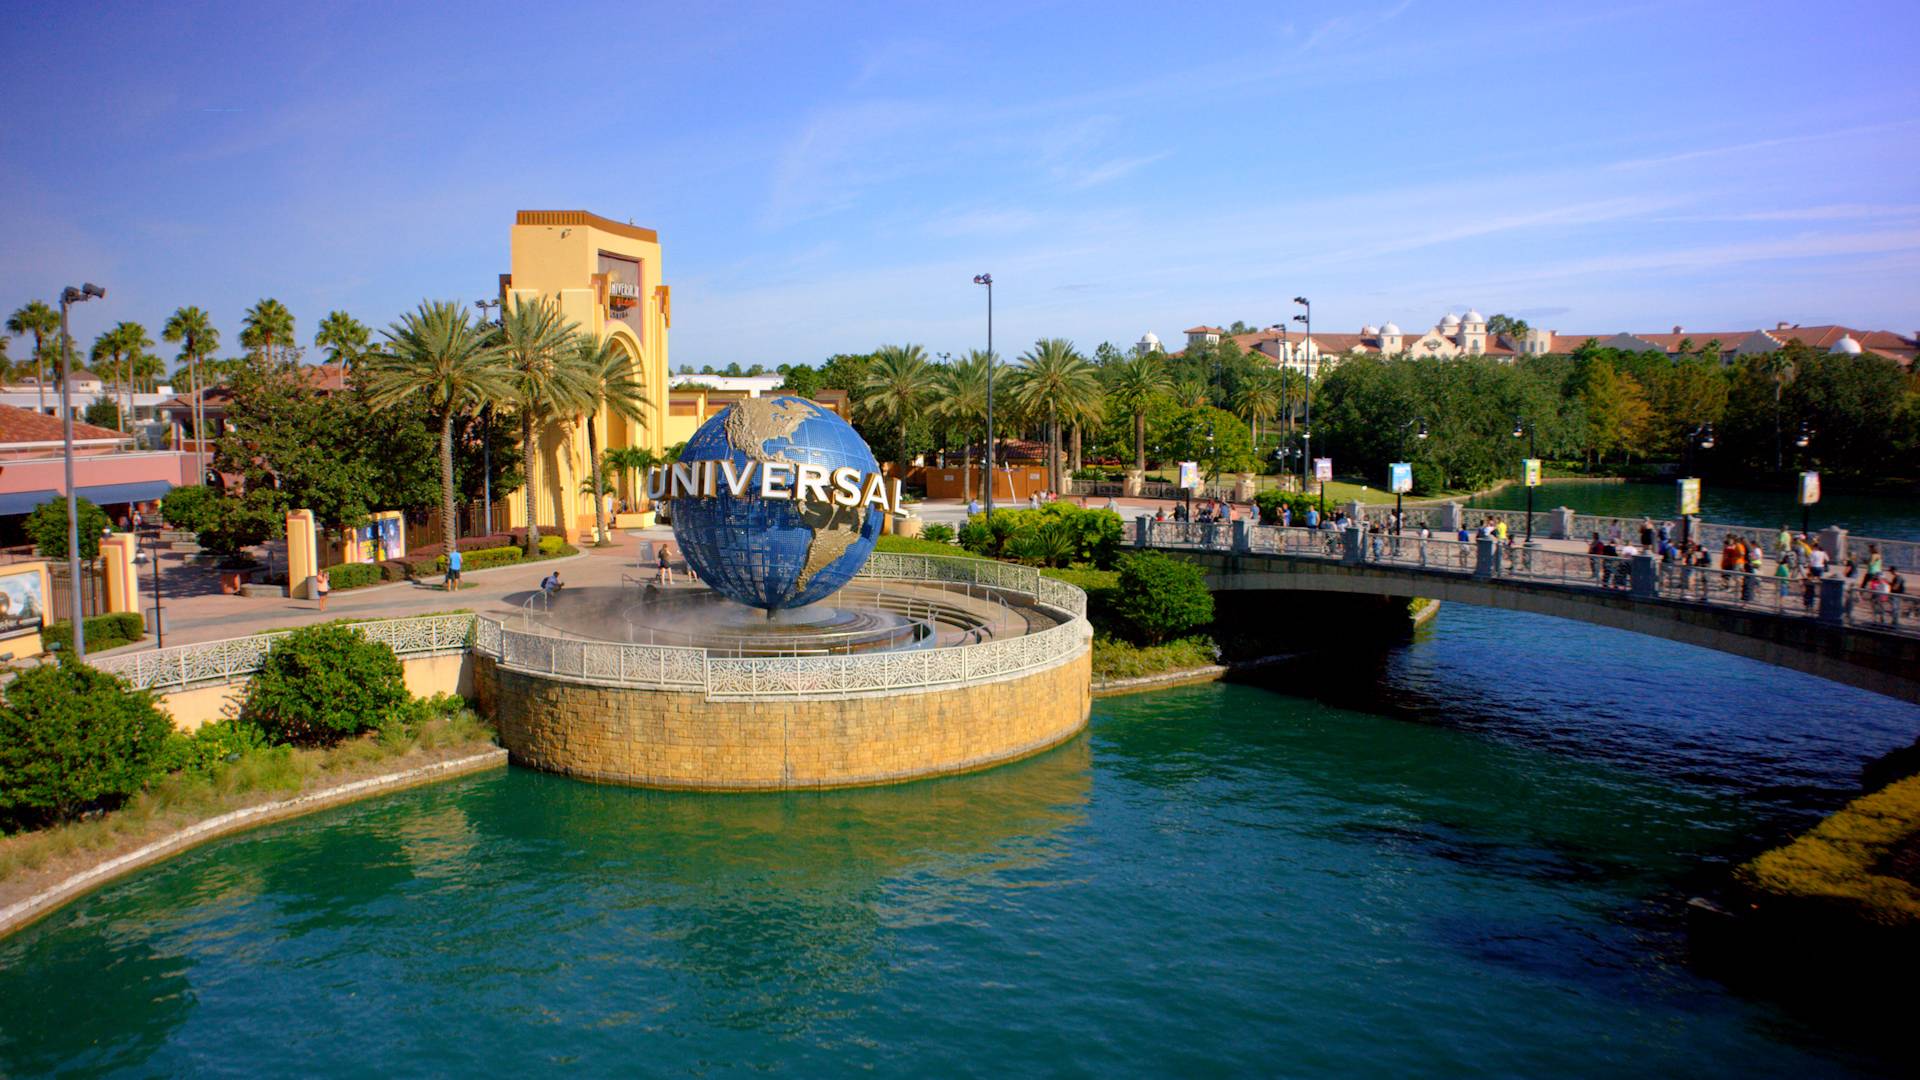 Disney's theme park business competitor Universal Orlando says it will increase starting pay to $17